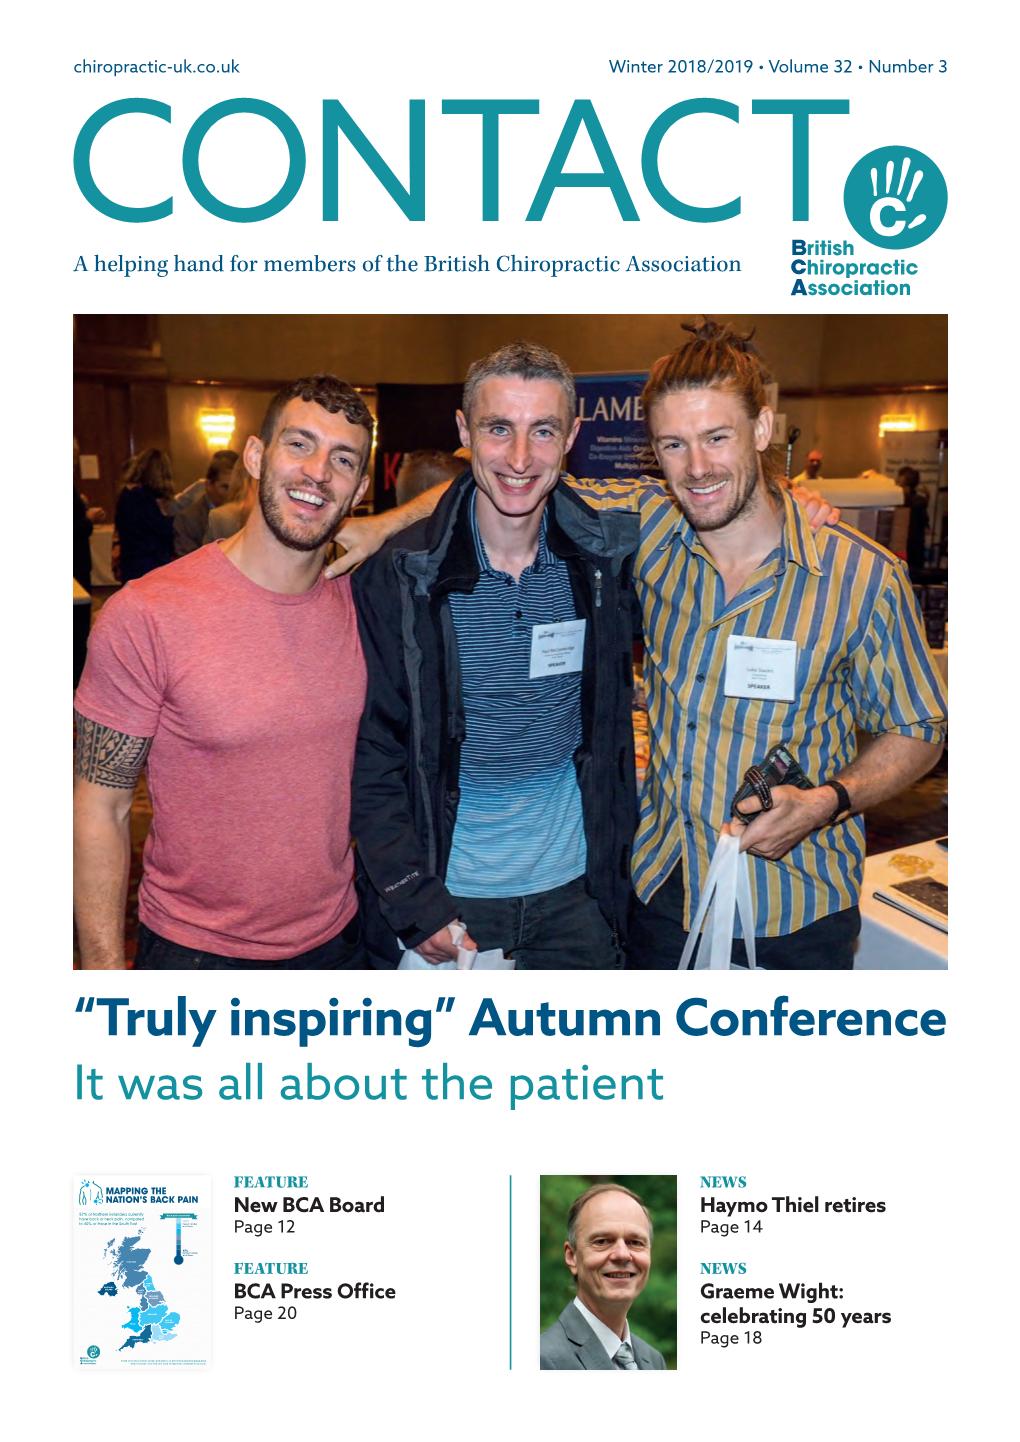 Truly Inspiring” Autumn Conference It Was All About the Patient